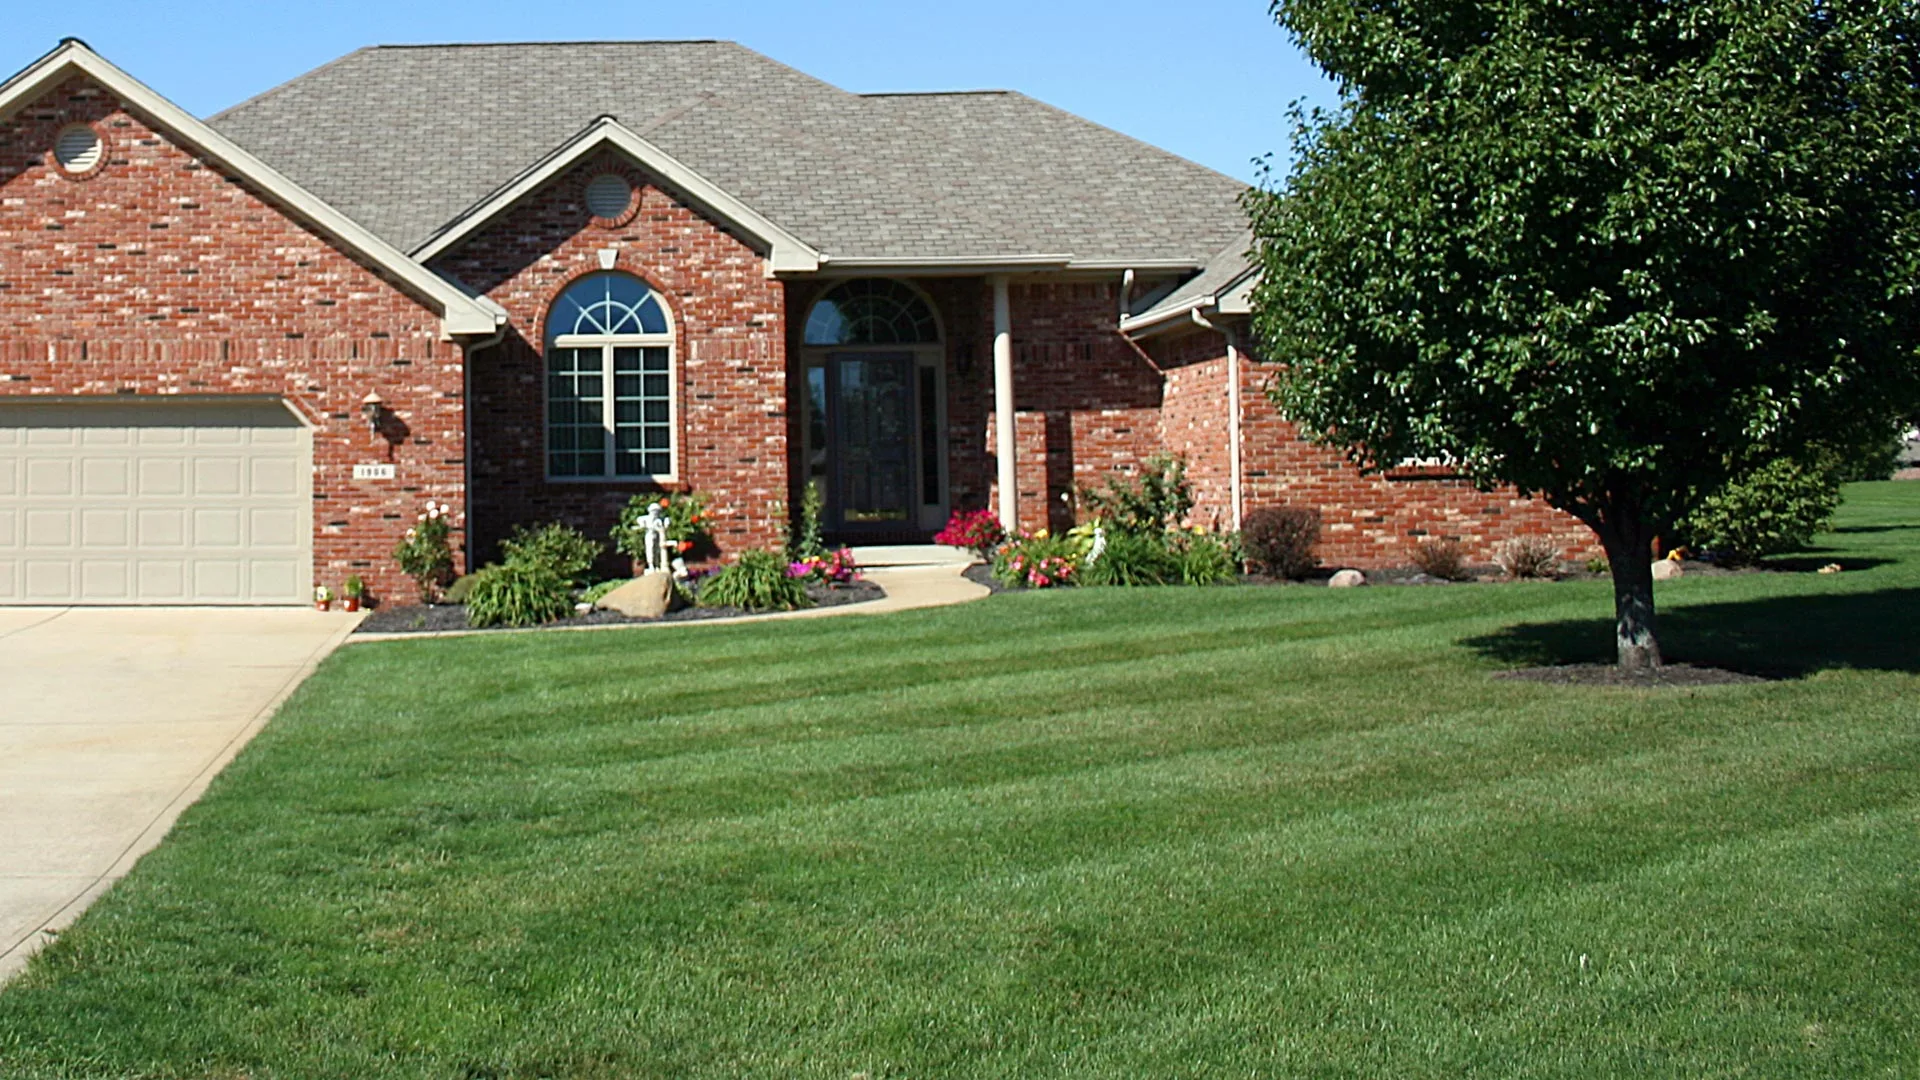  A professionally maintained lawn and landscape at a home in Des Moines, IA.